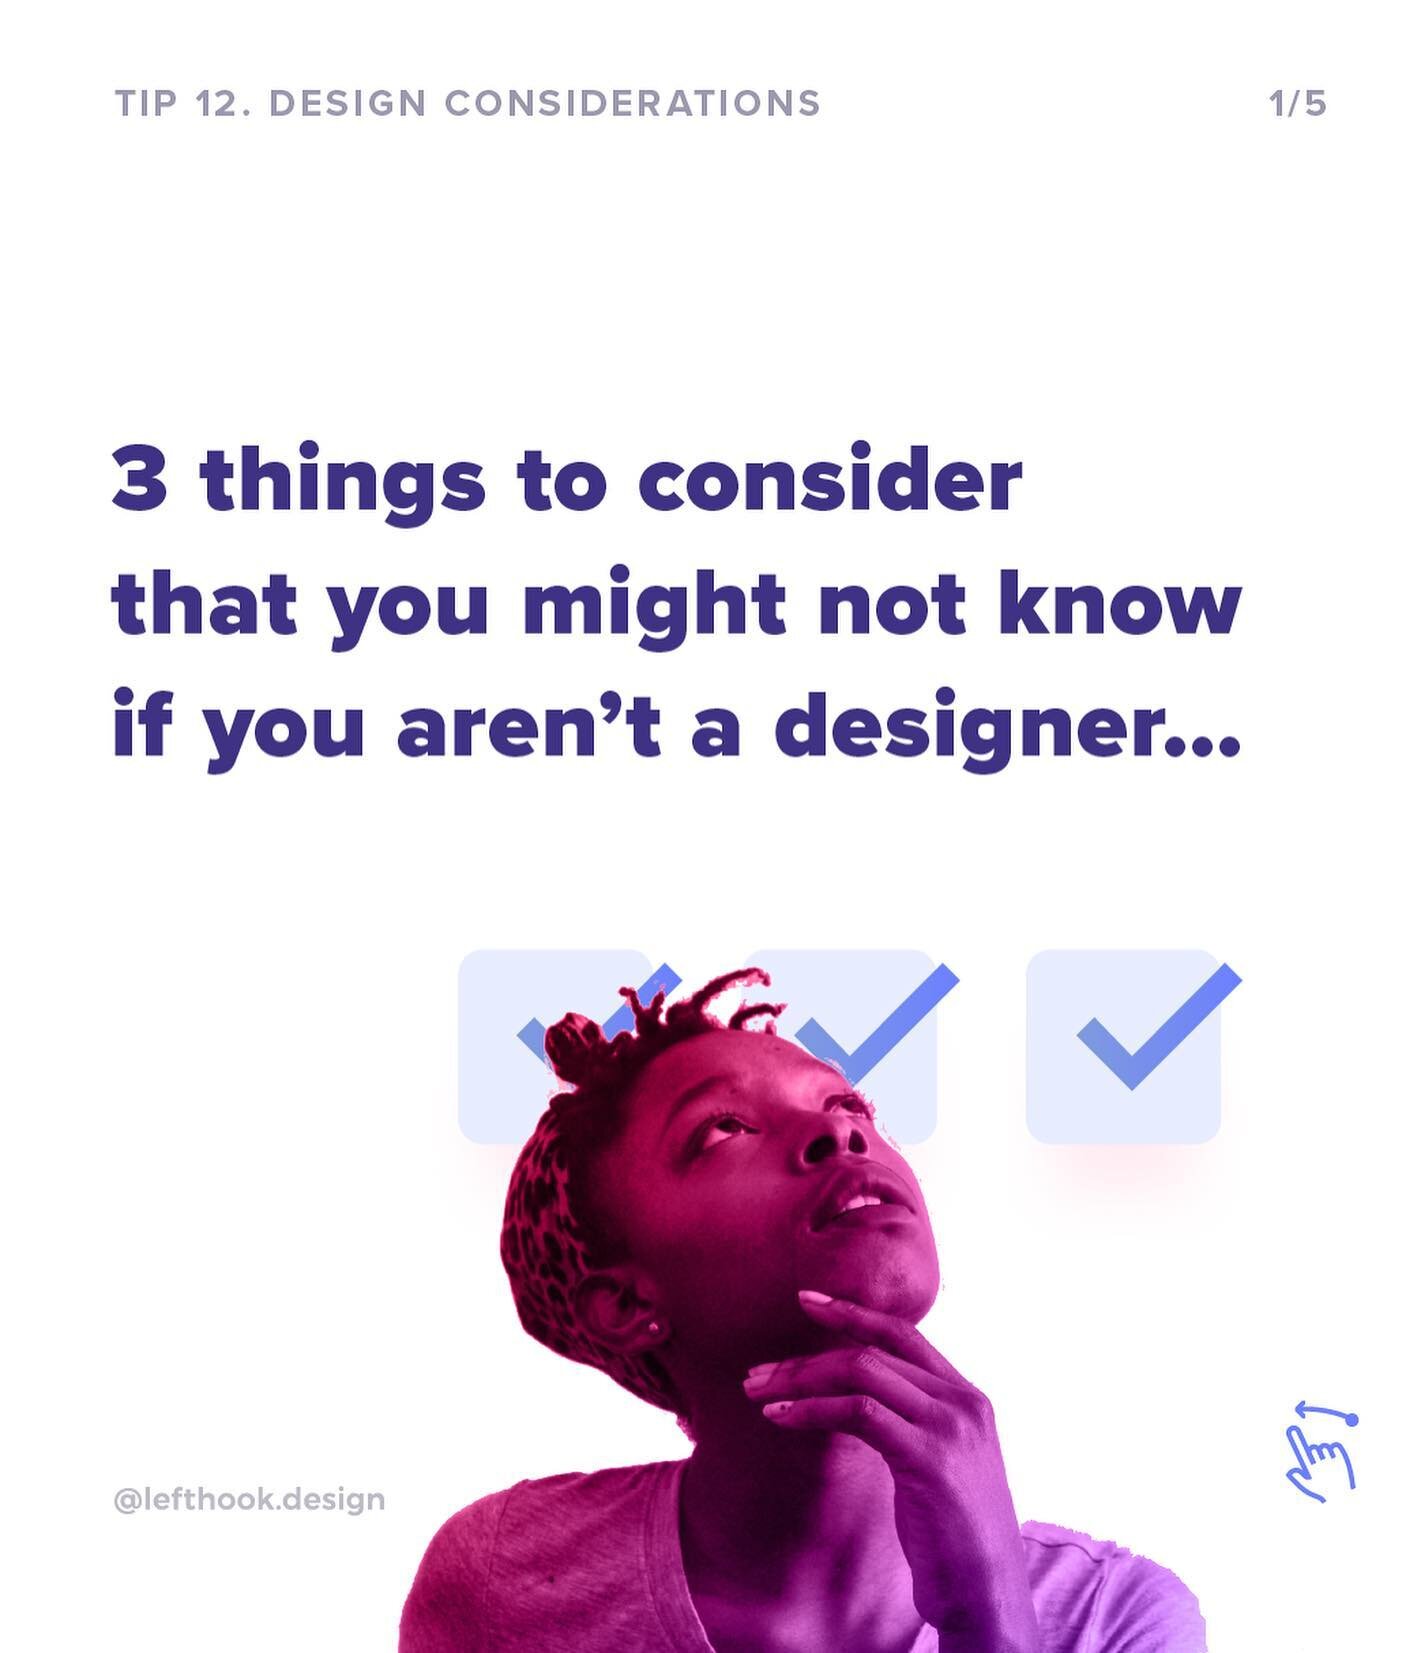 Lesser known things designers consider when we&rsquo;re working on a project. Keep these things in mind next time you&rsquo;re designing content for your business. Whether it&rsquo;s an email, a website, a logo, or a tshirt. 💡

#designtips #graphicd